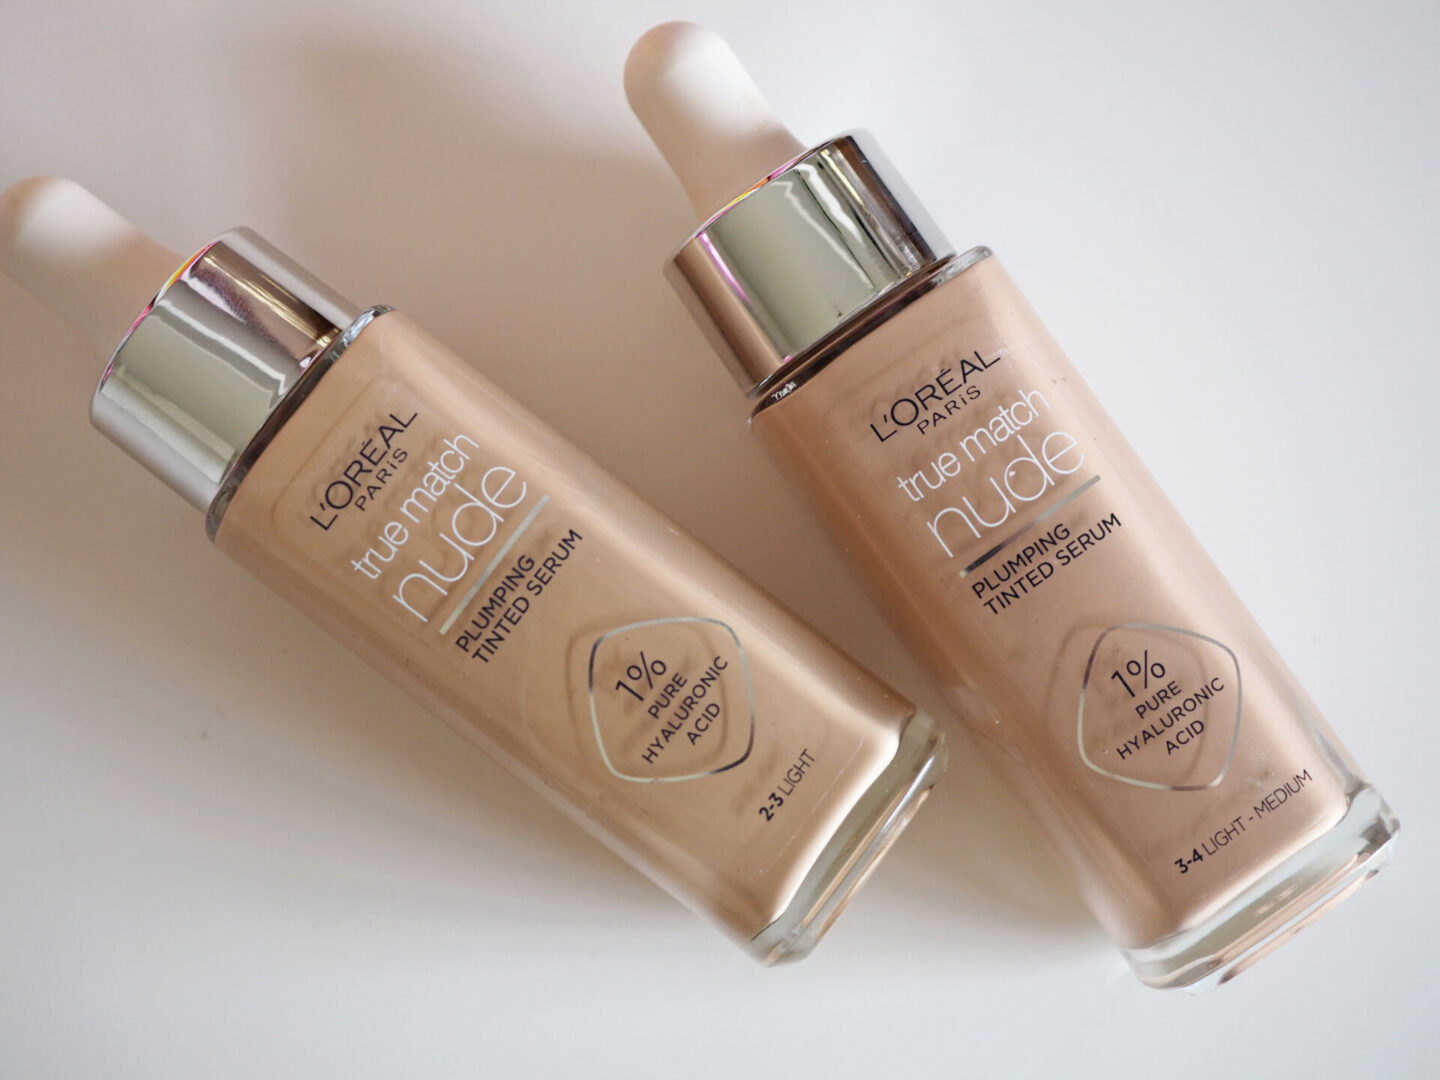 The L'Oreal Paris True Match Nude Plumping Tinted Serum Foundation : Review  With Before + After. - Laura Louise Makeup + Beauty